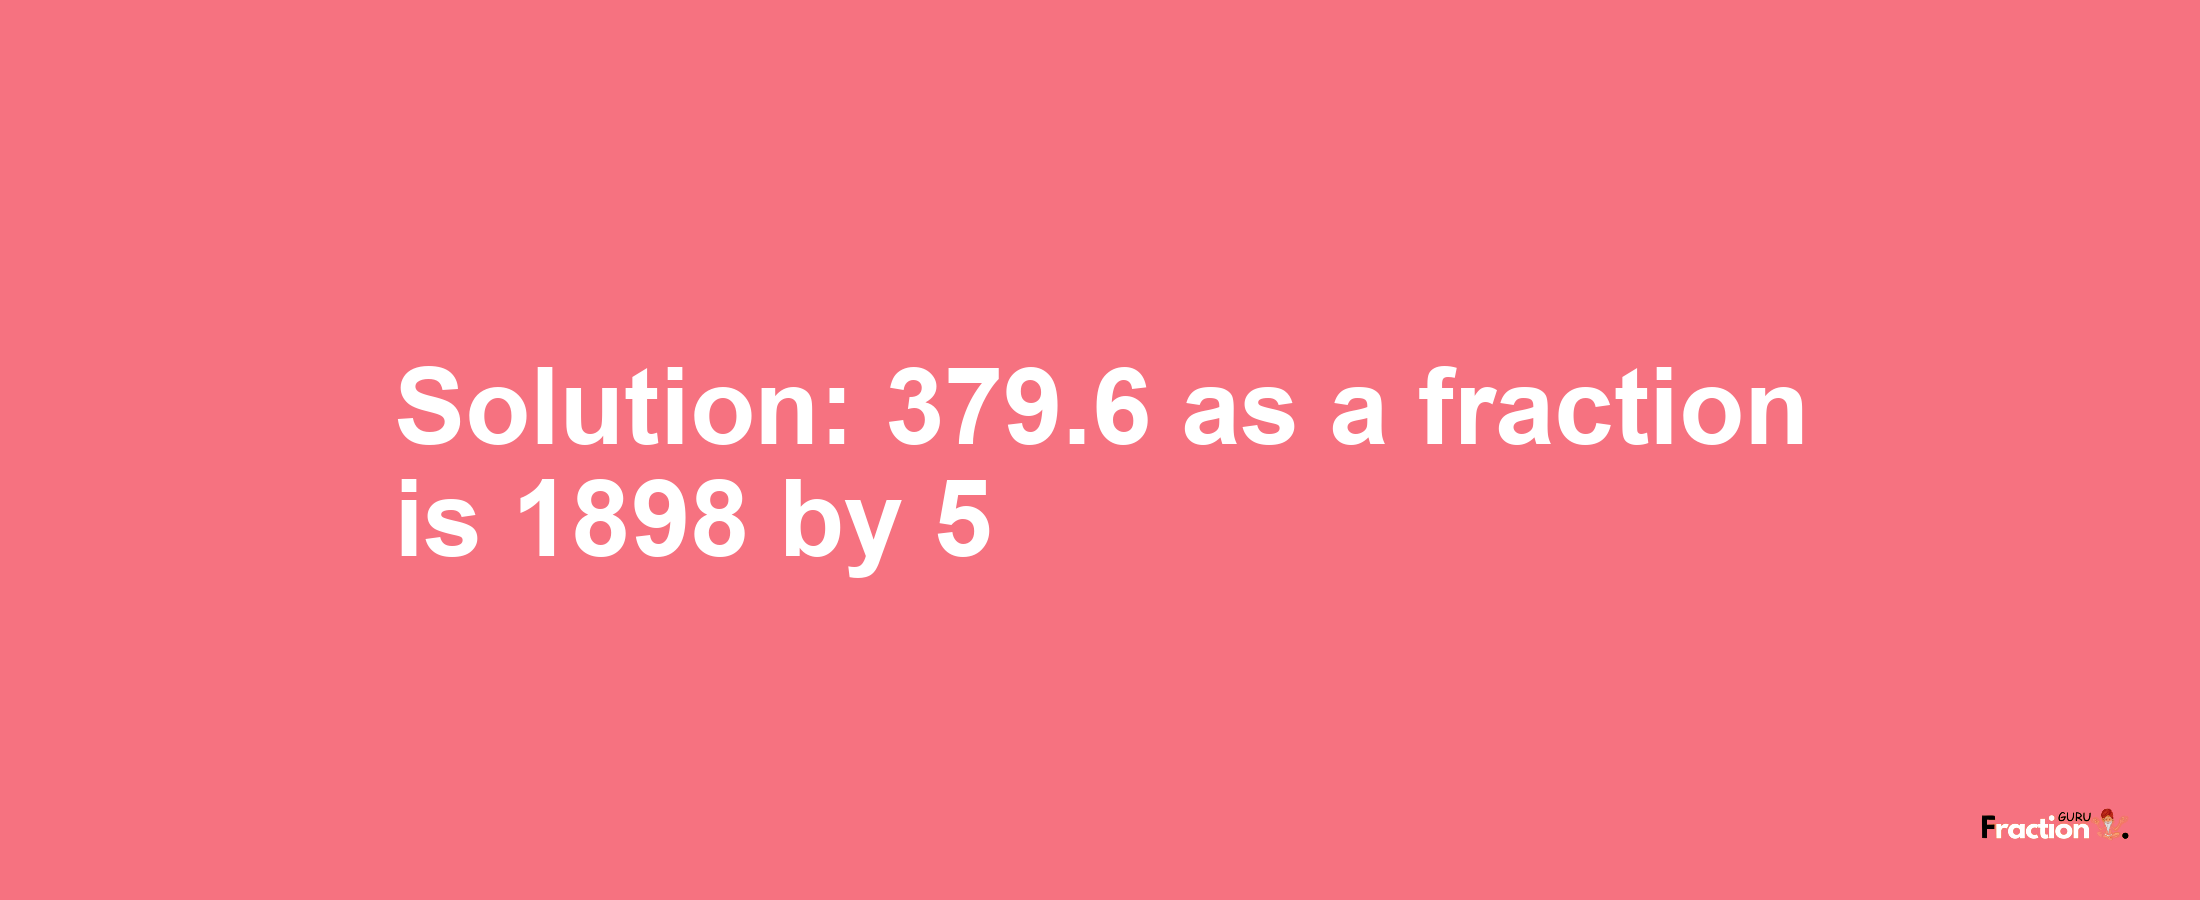 Solution:379.6 as a fraction is 1898/5